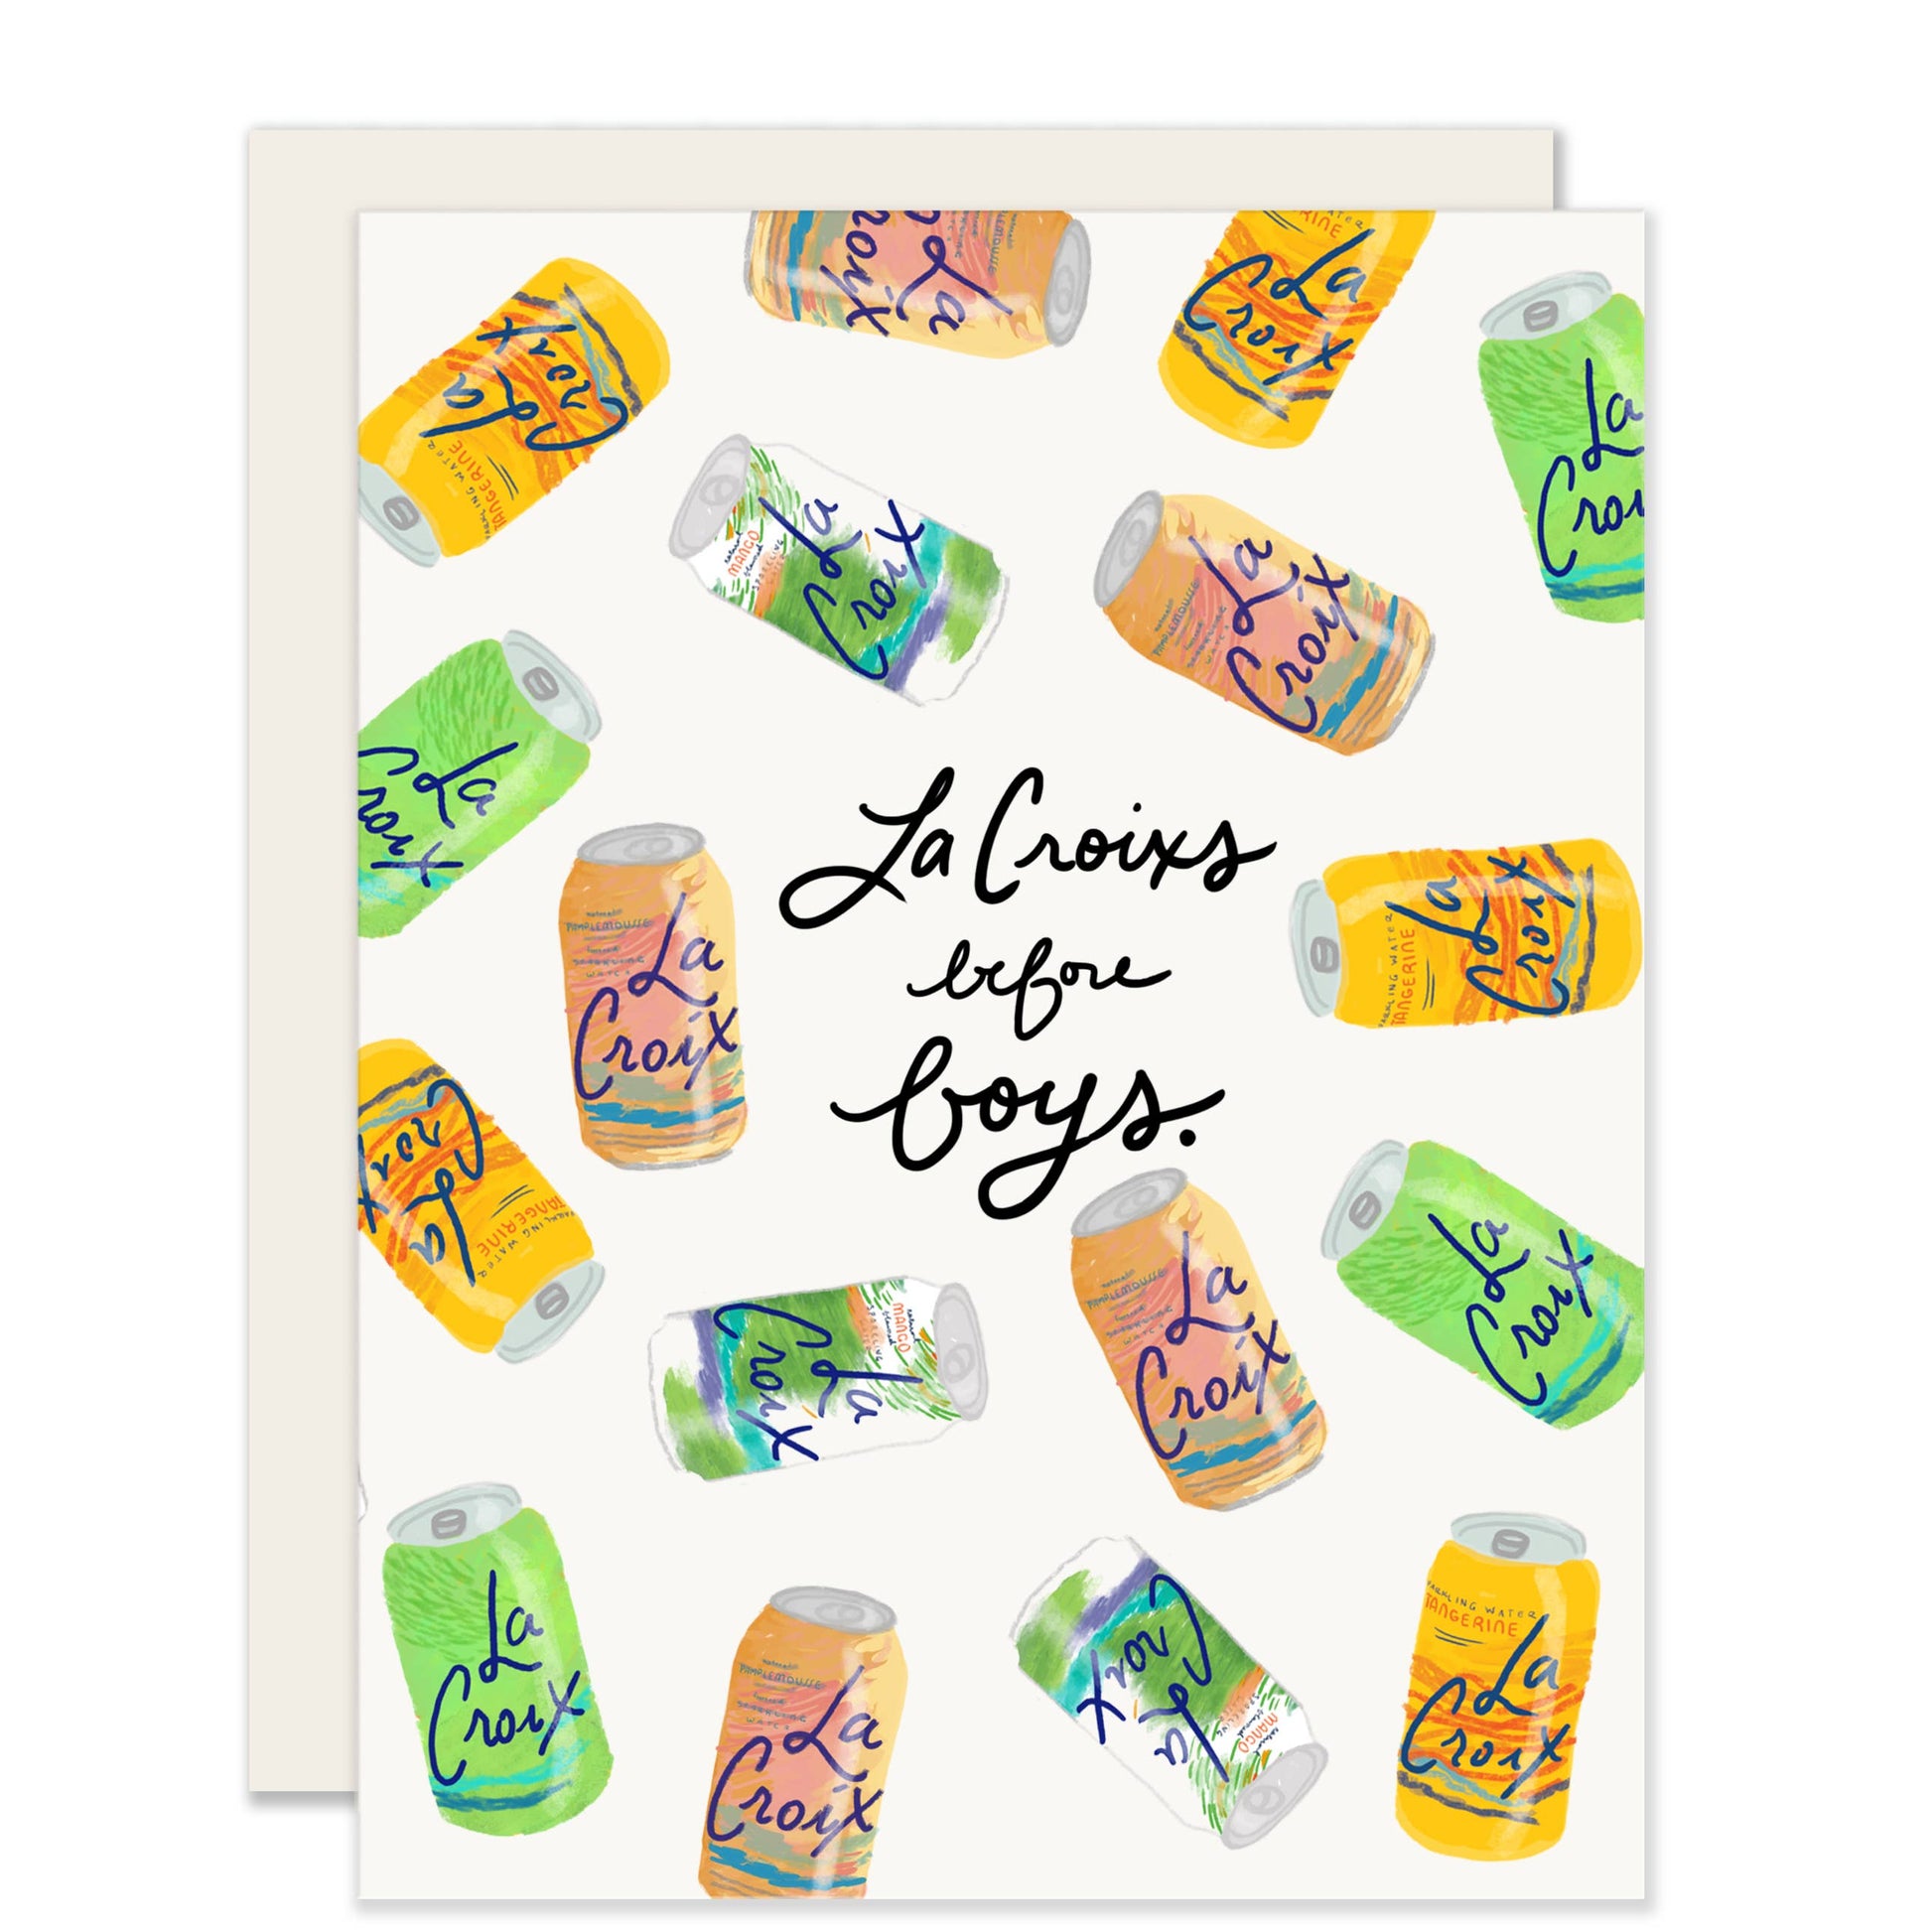 LaCroixs before boys greeting card 